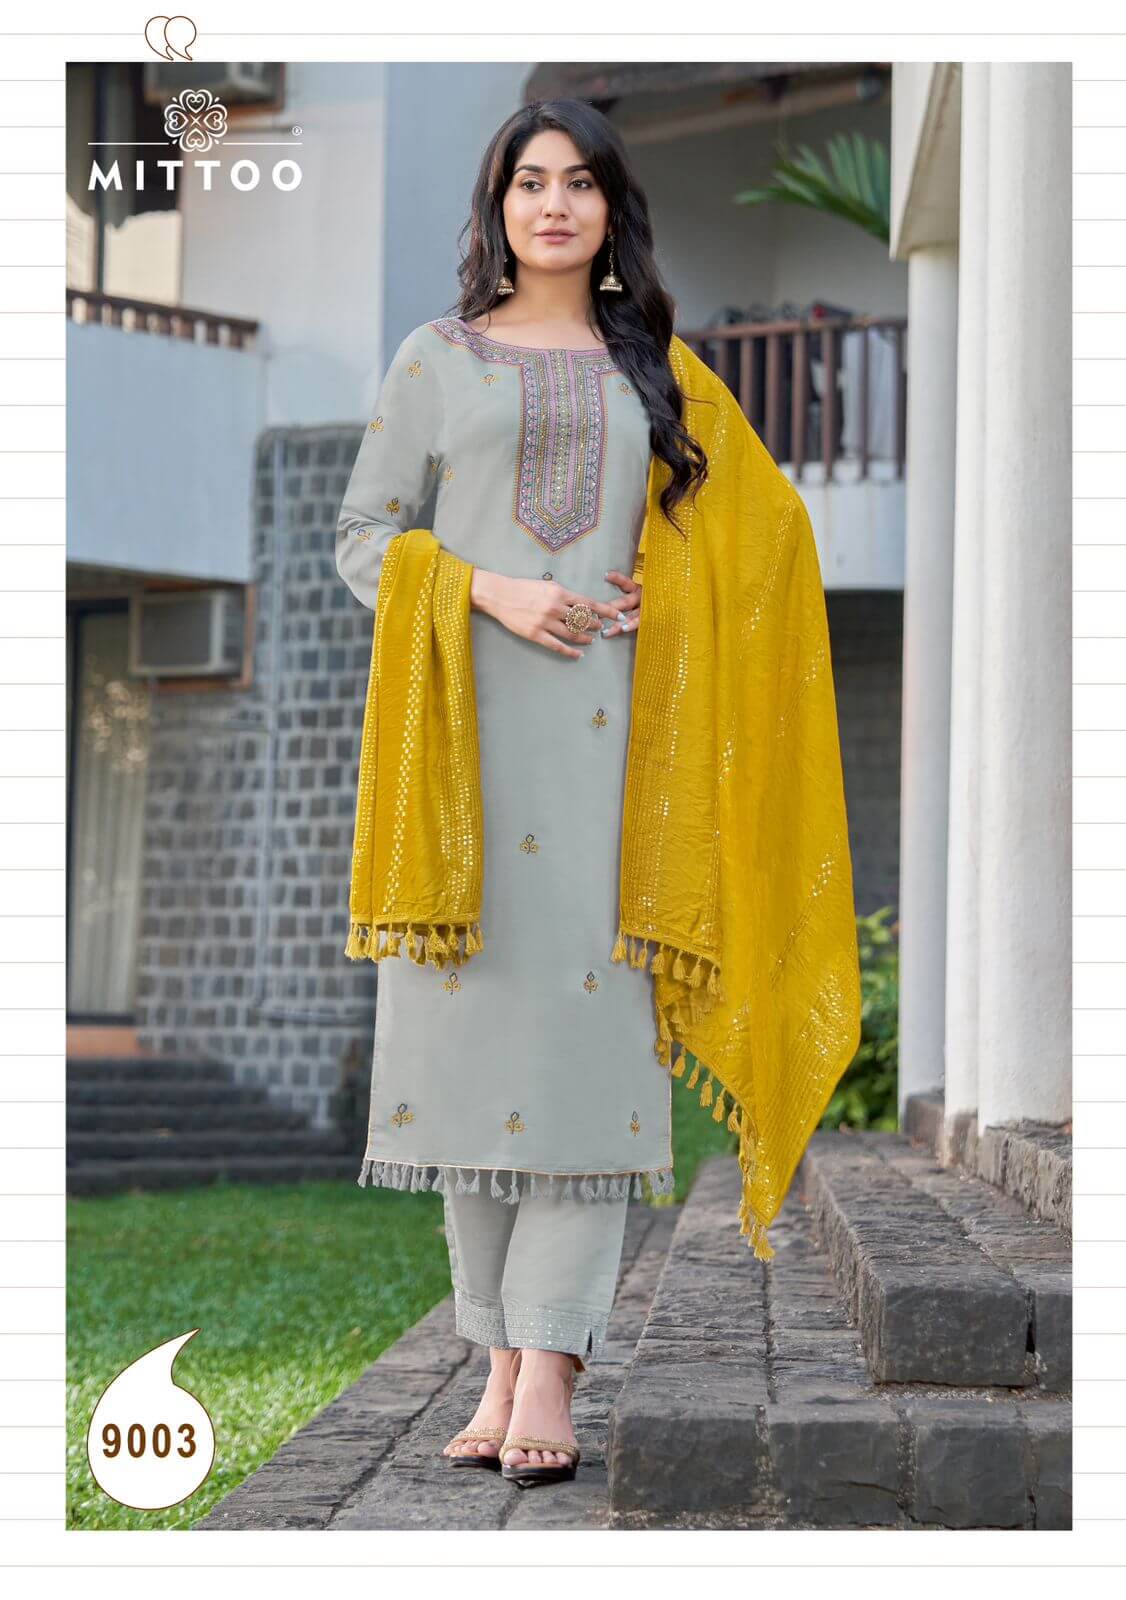 Mittoo Mosam Embroidery Salwar Kameez Catalog collection 6